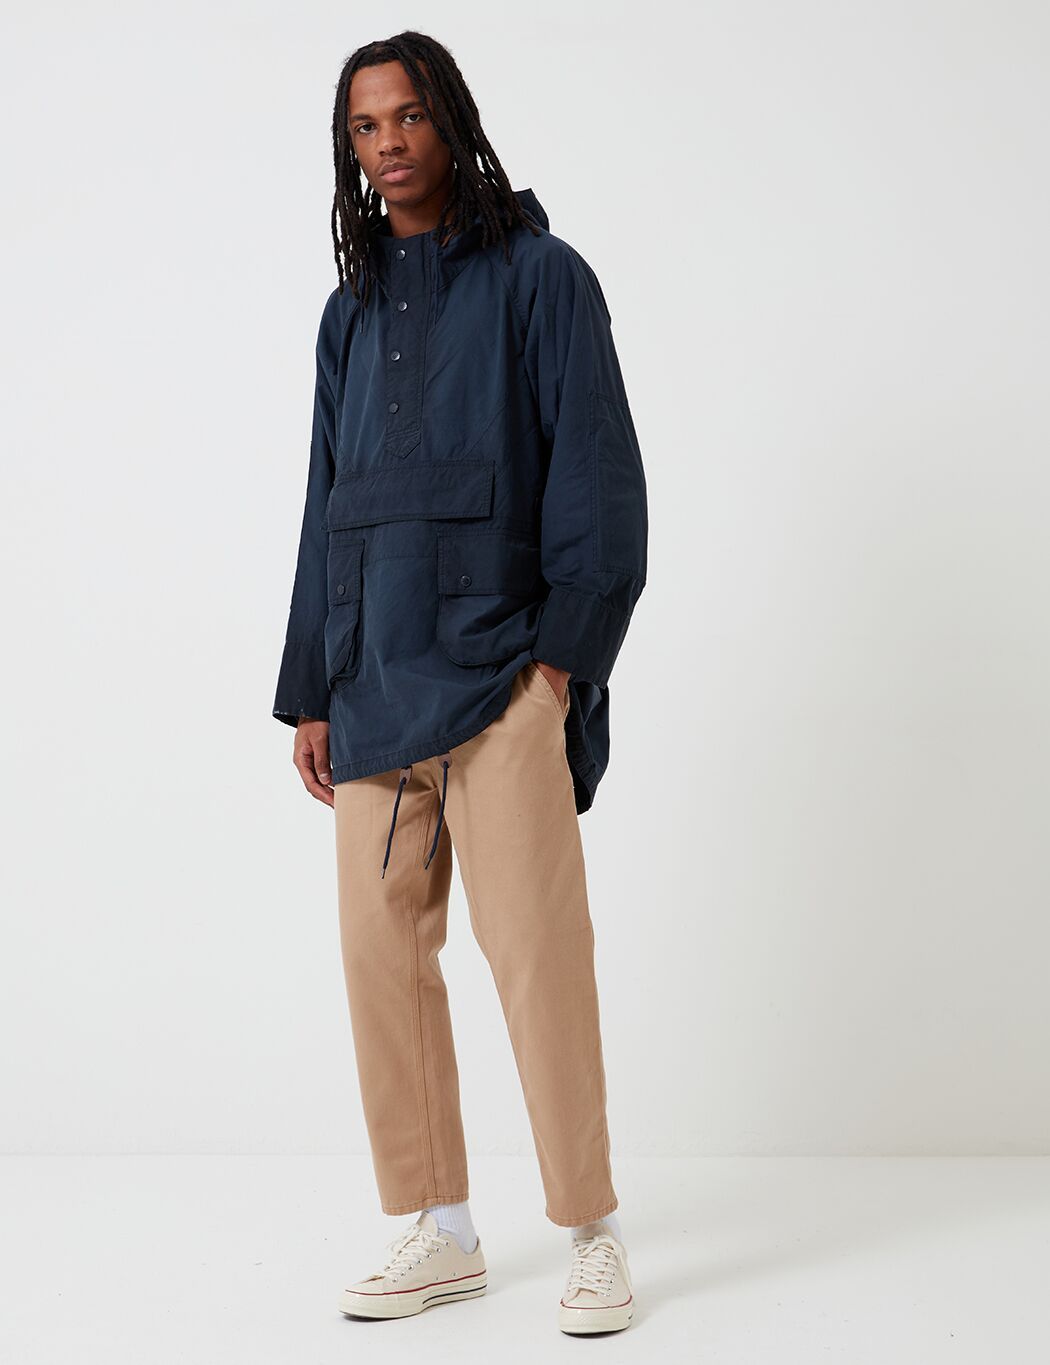 Barbour x Engineered Garments Washed Warby Casual Jacket - Navy